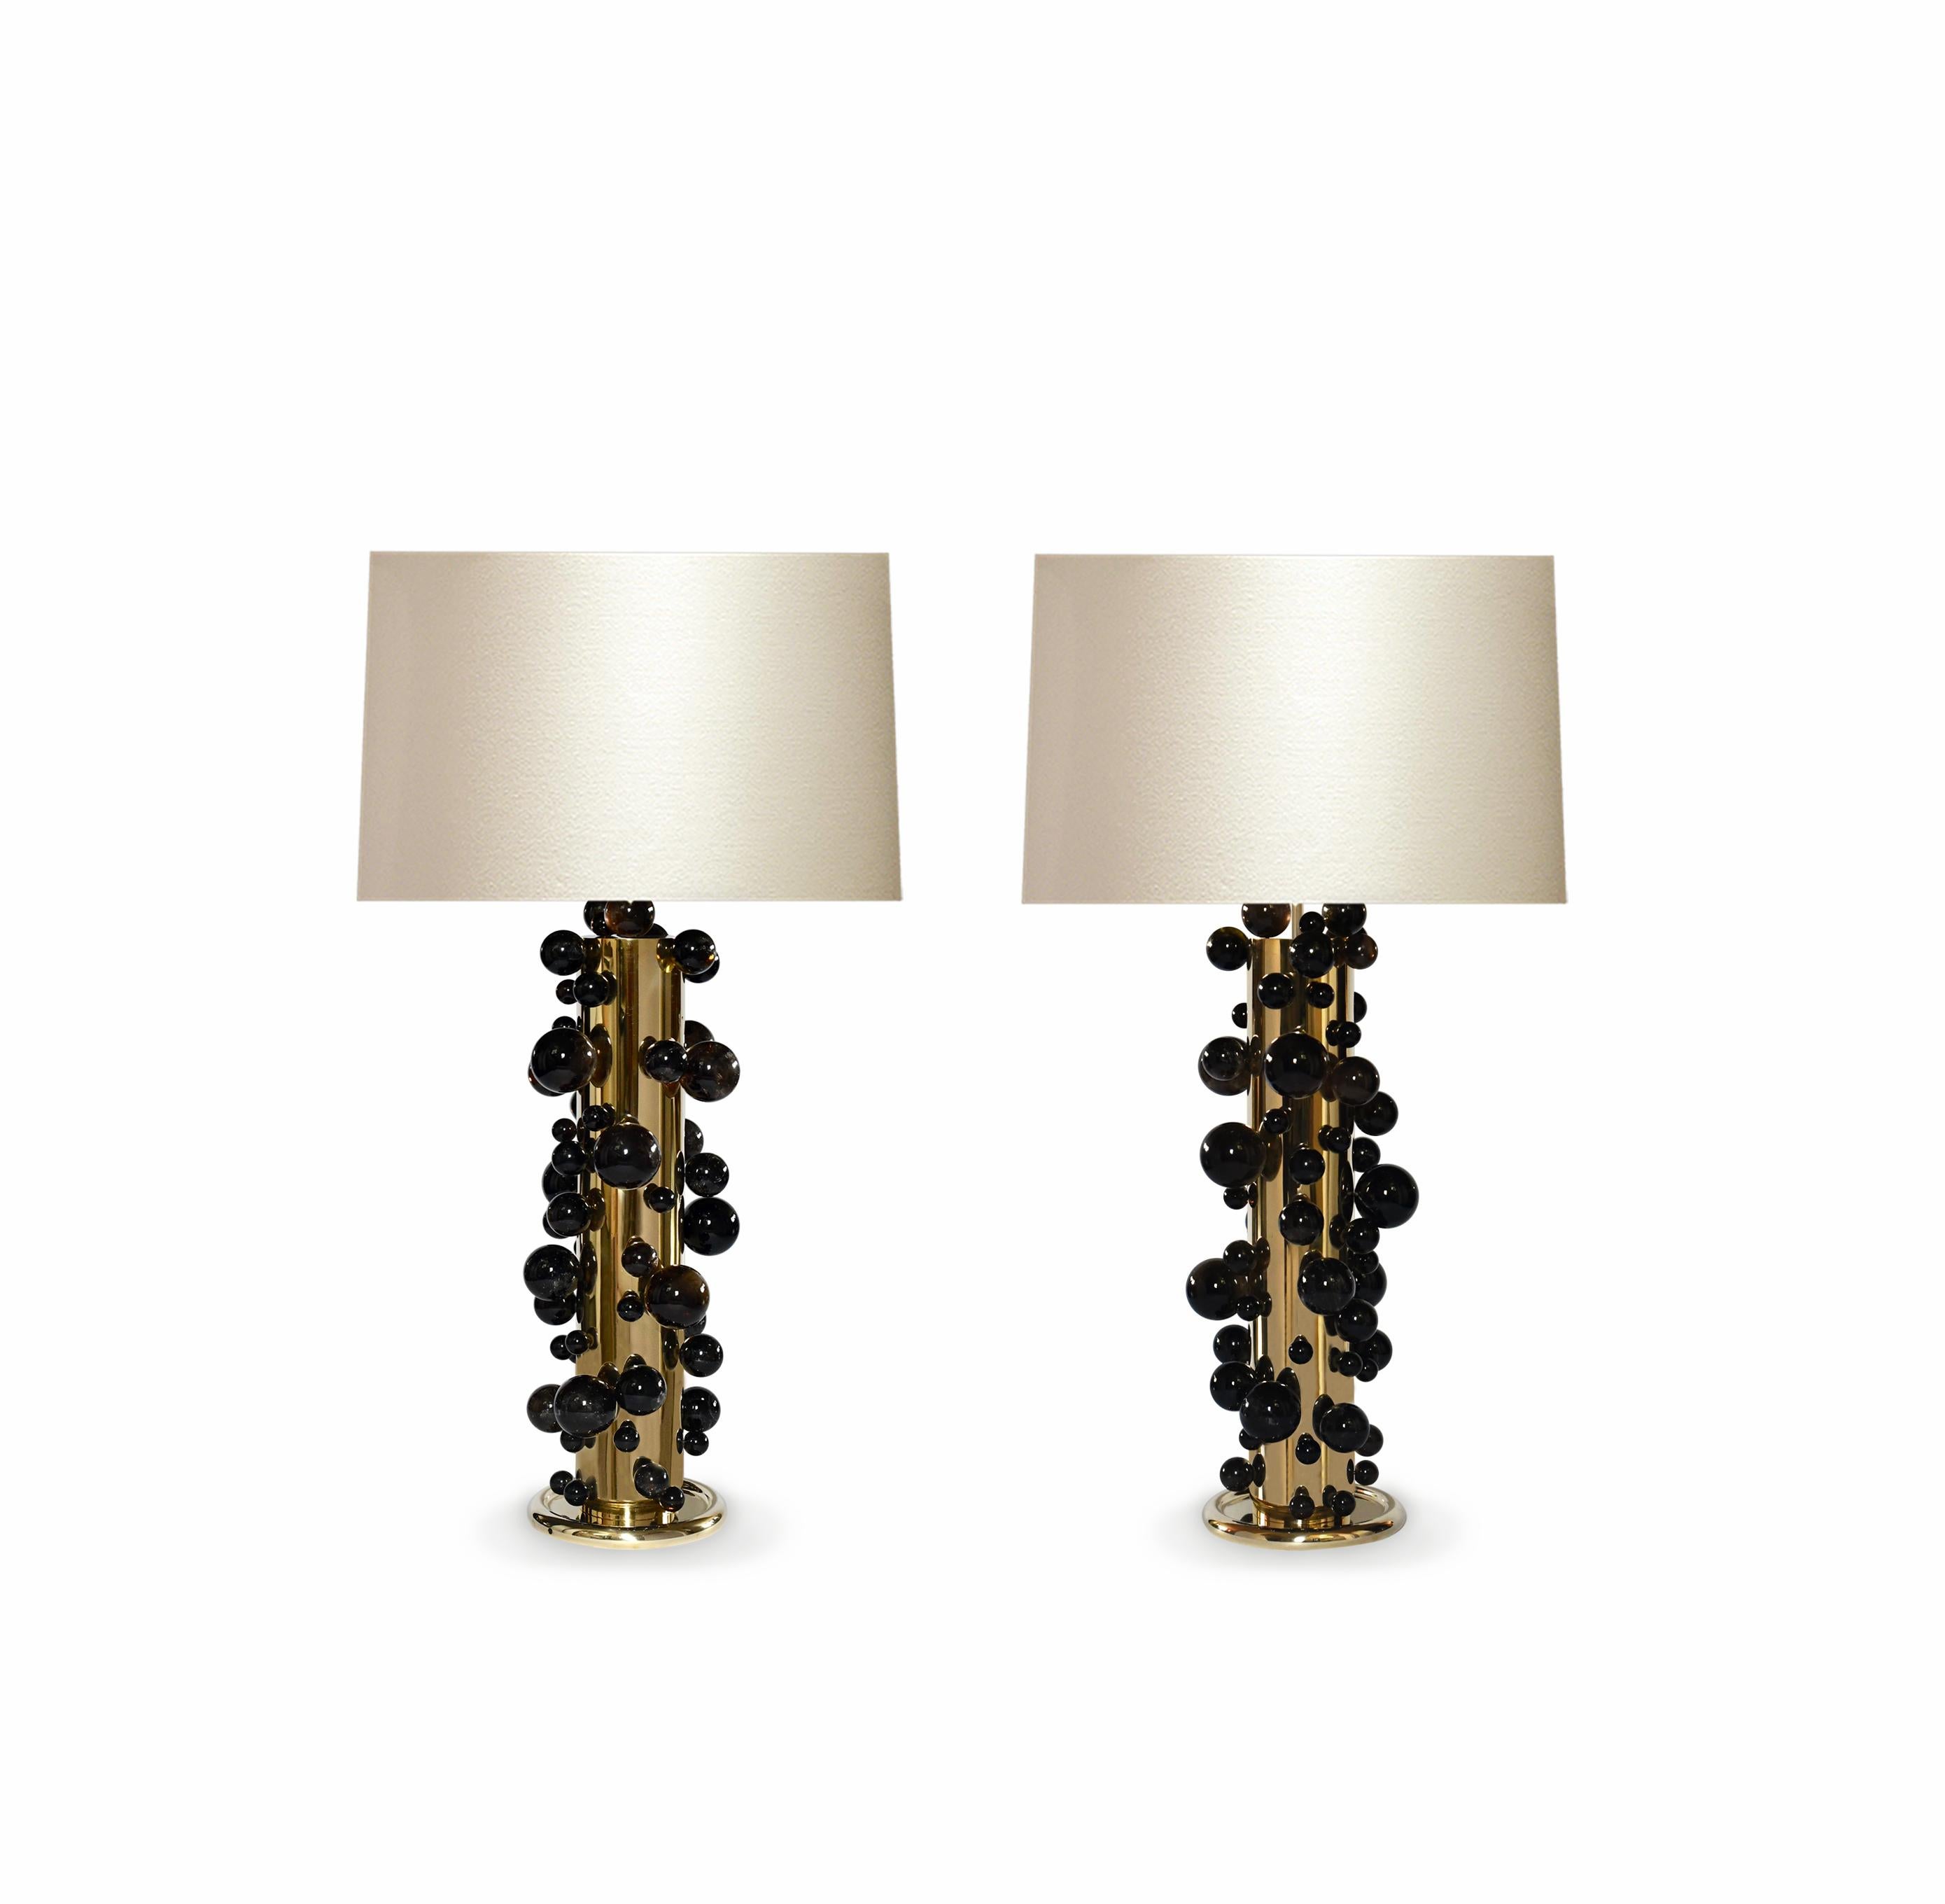 A tall pair of luxury dark rock crystal quartz bubble lamps with polish brass frame. Created by Phoenix Gallery, NYC.
Each lamp installed two sockets.
To the top of the rock crystal 25.75